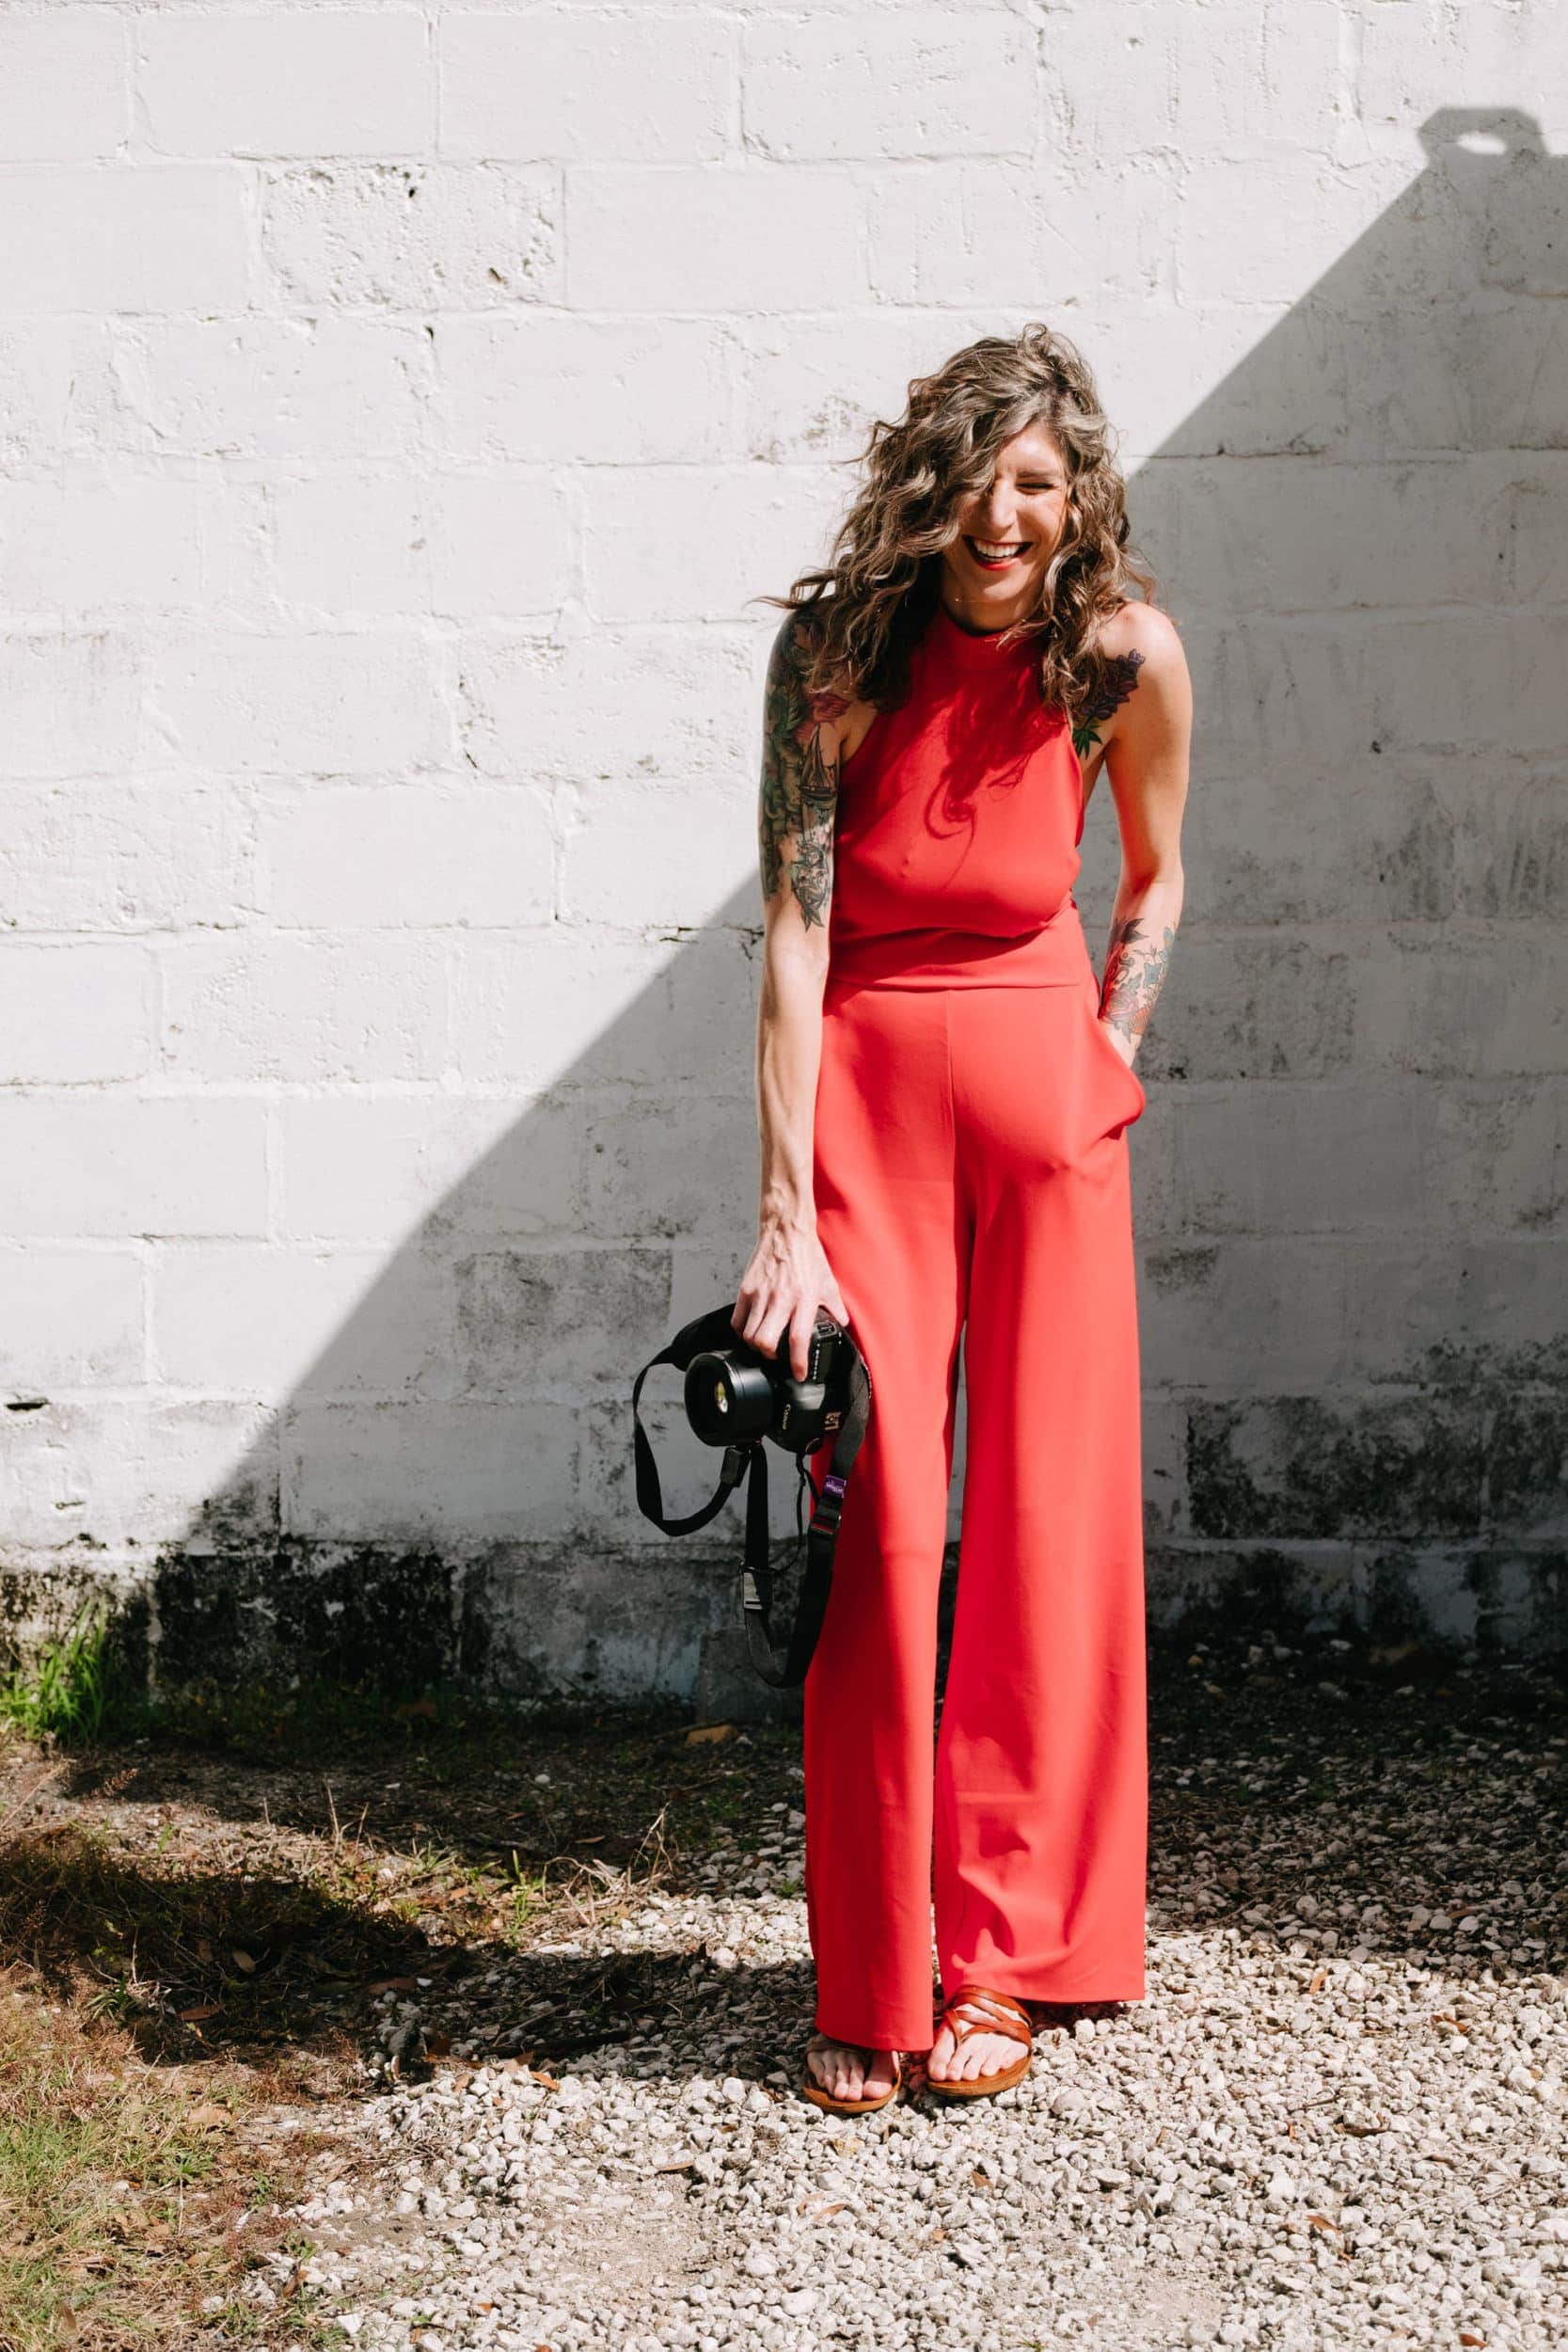 Photographer in red jumpsuit laughing with camera in hand